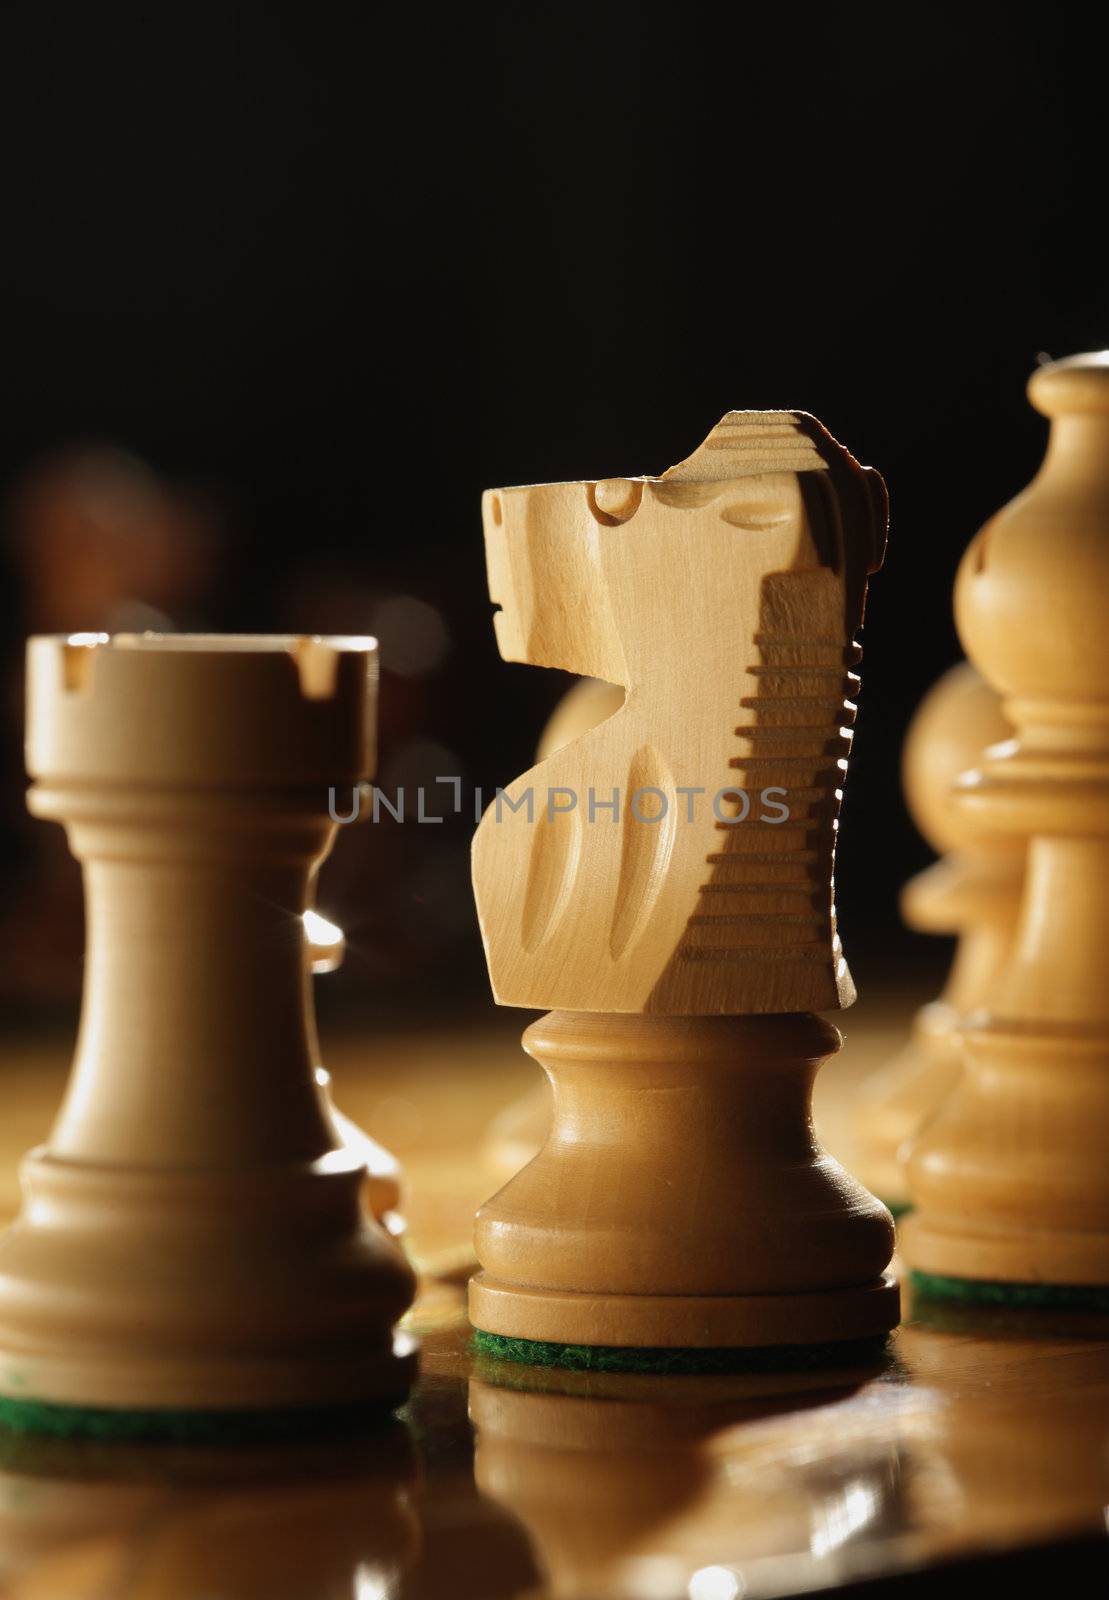 chess pieces, Low depth of field, focus on horse